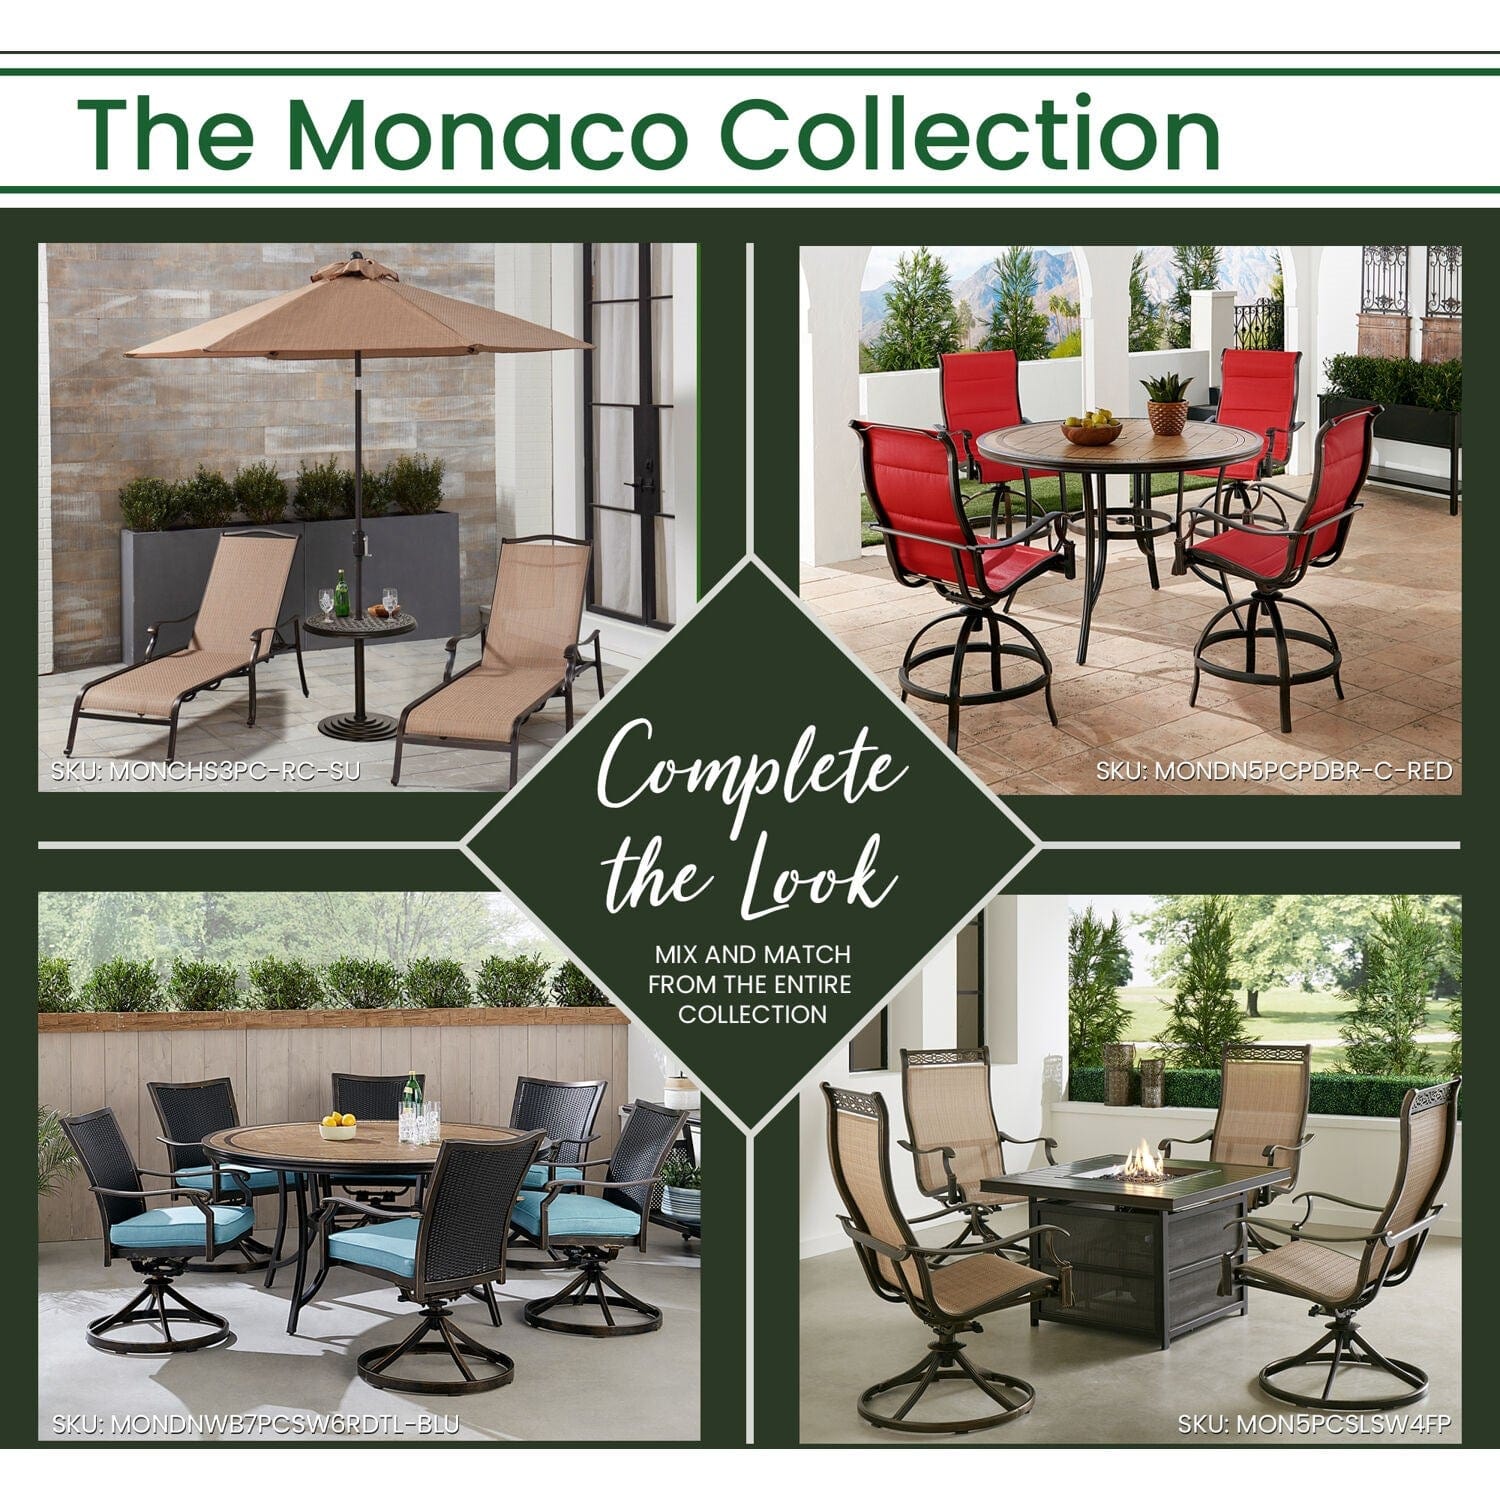 Hanover Outdoor Dining Set Hanover Monaco 5-Piece High-Dining Set in Red with 4 Padded Counter-Height Swivel Chairs and a 56-In. Tile-Top Table | MONDN5PCPDBR-C-RED